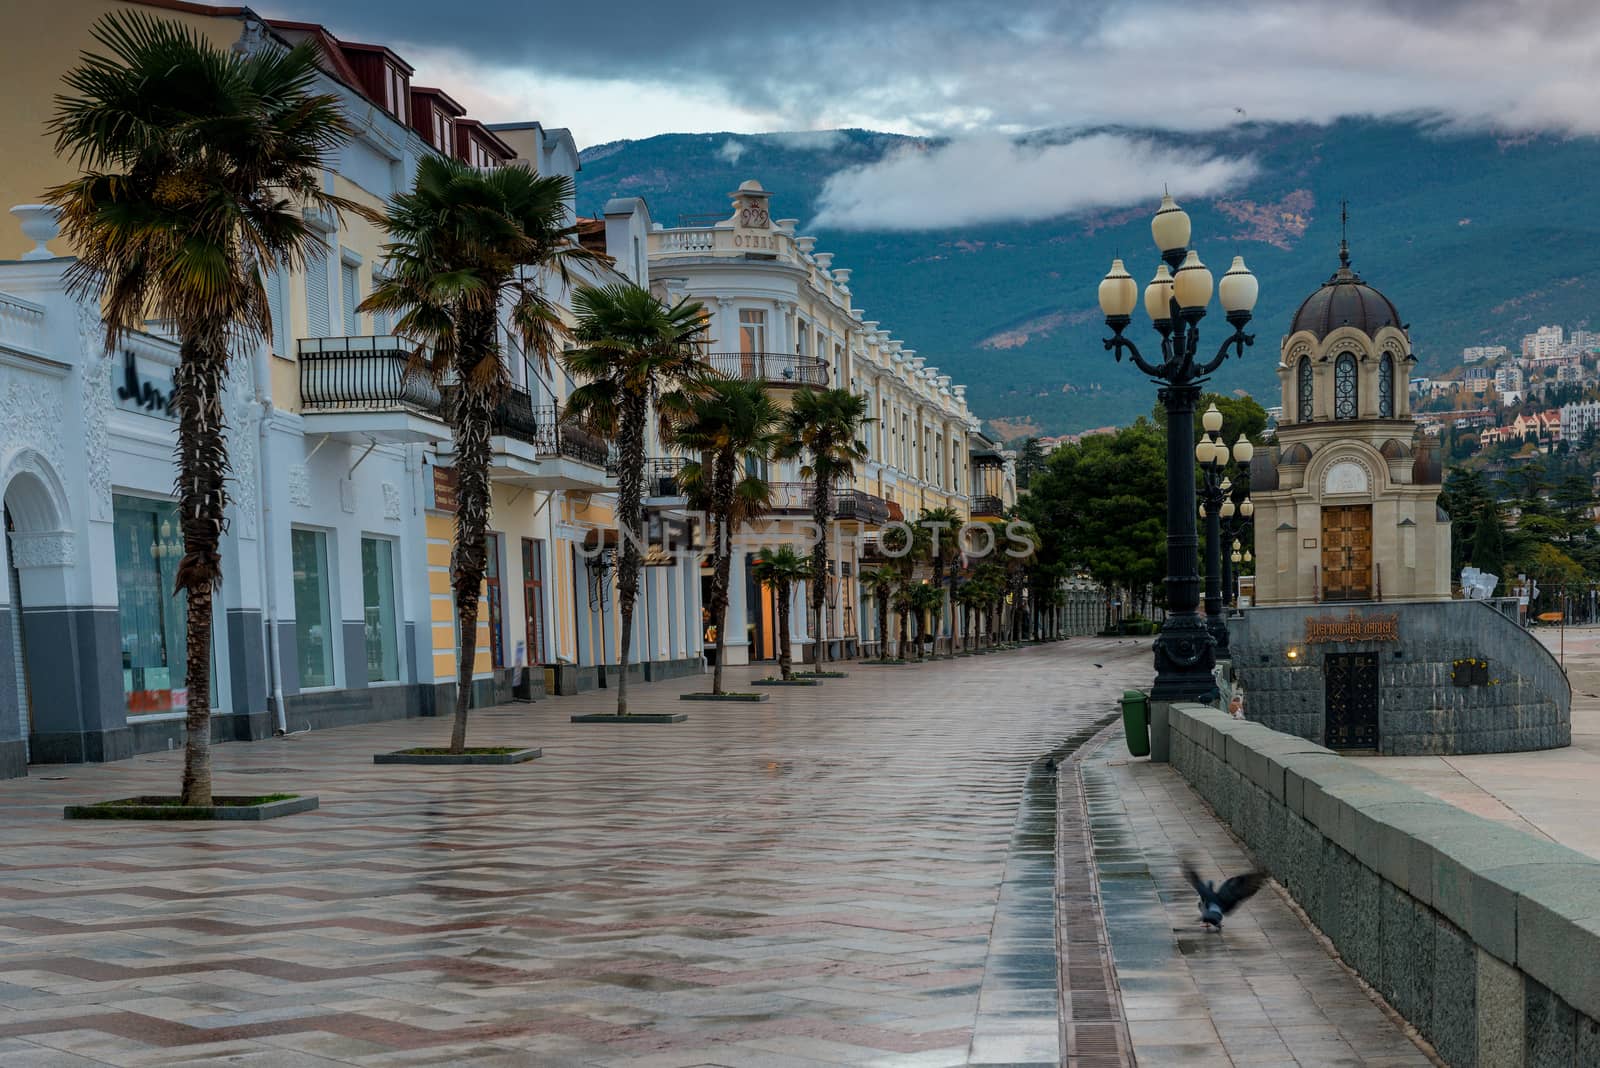 Embankment of the Russian city of Yalta in the autumn afternoon, by kosmsos111